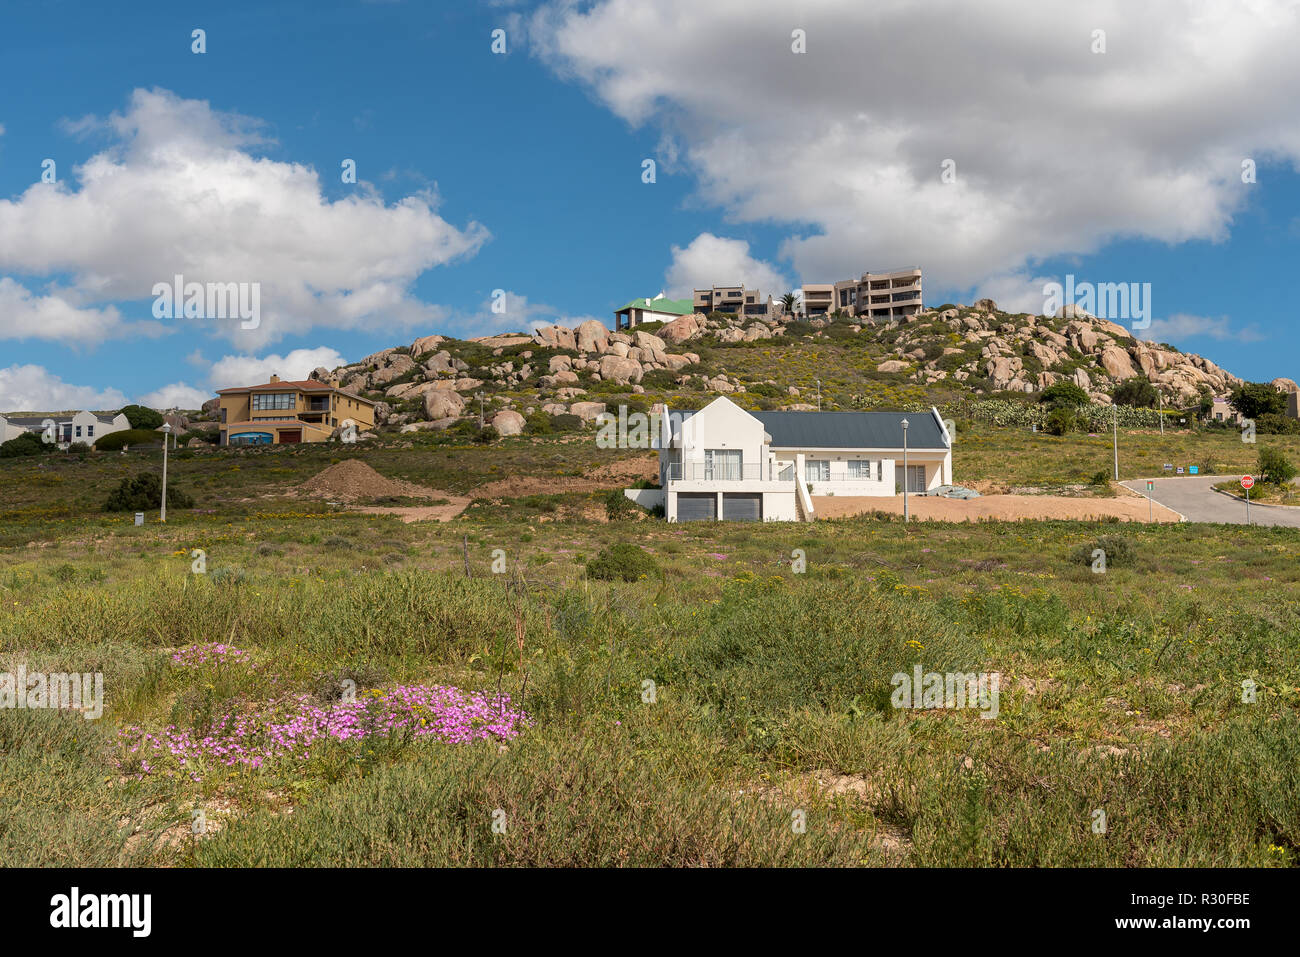 ST HELENA BAY, SOUTH AFRICA, AUGUST 21, 2018: A view of wild flowers and luxury houses in St Helena Bay on the Atlantic Ocean Coast Stock Photo